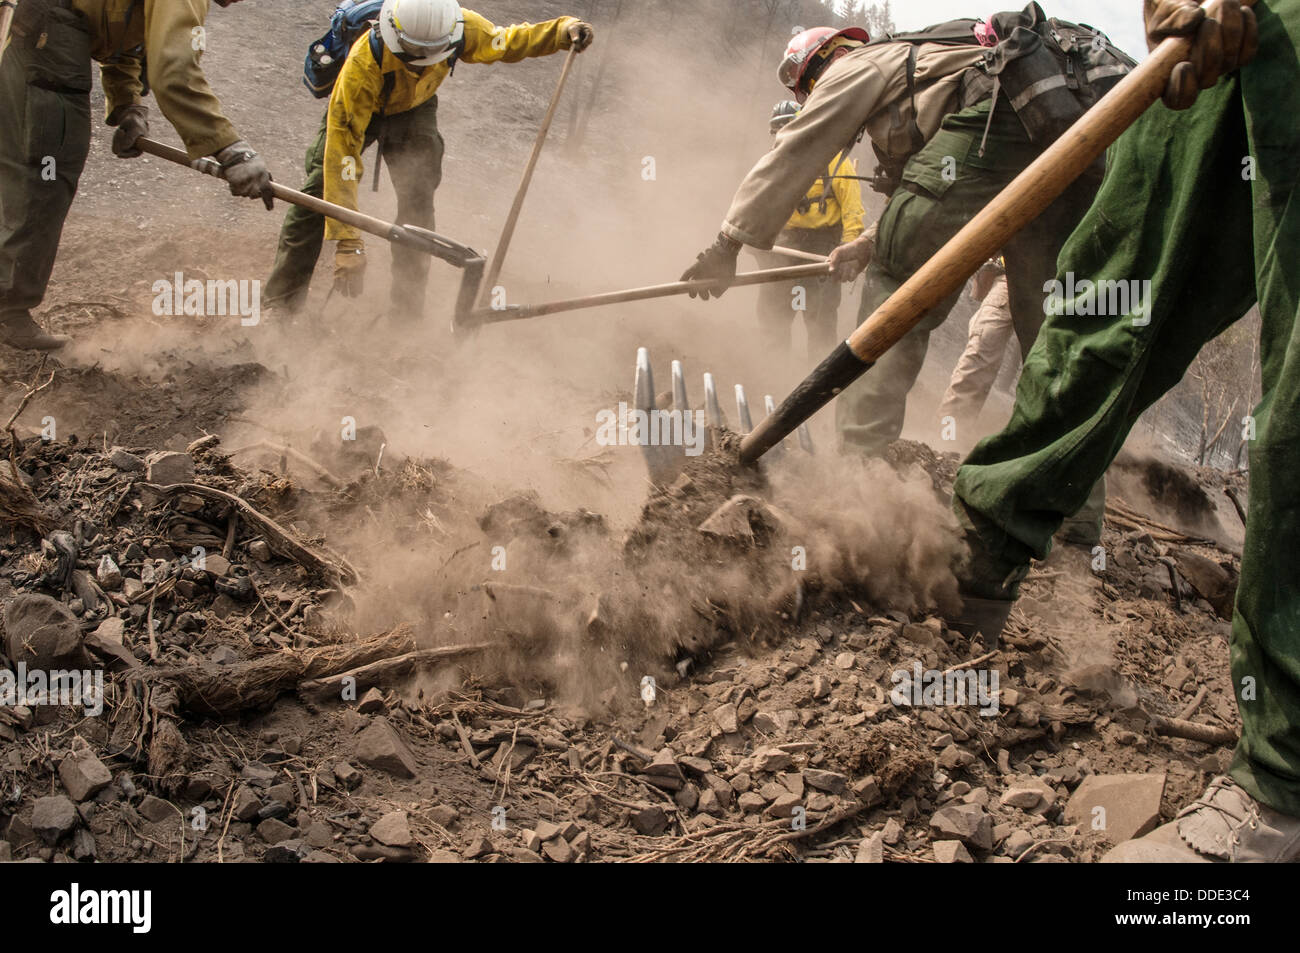 Southern Plains and Comanche wildfire initial Attack Crews work to extinguish underground smoldering fire in roots or buried tree limbs using hand tools at the Beaver Creek Fire August 21, 2013 west of Hailey, ID. Stock Photo